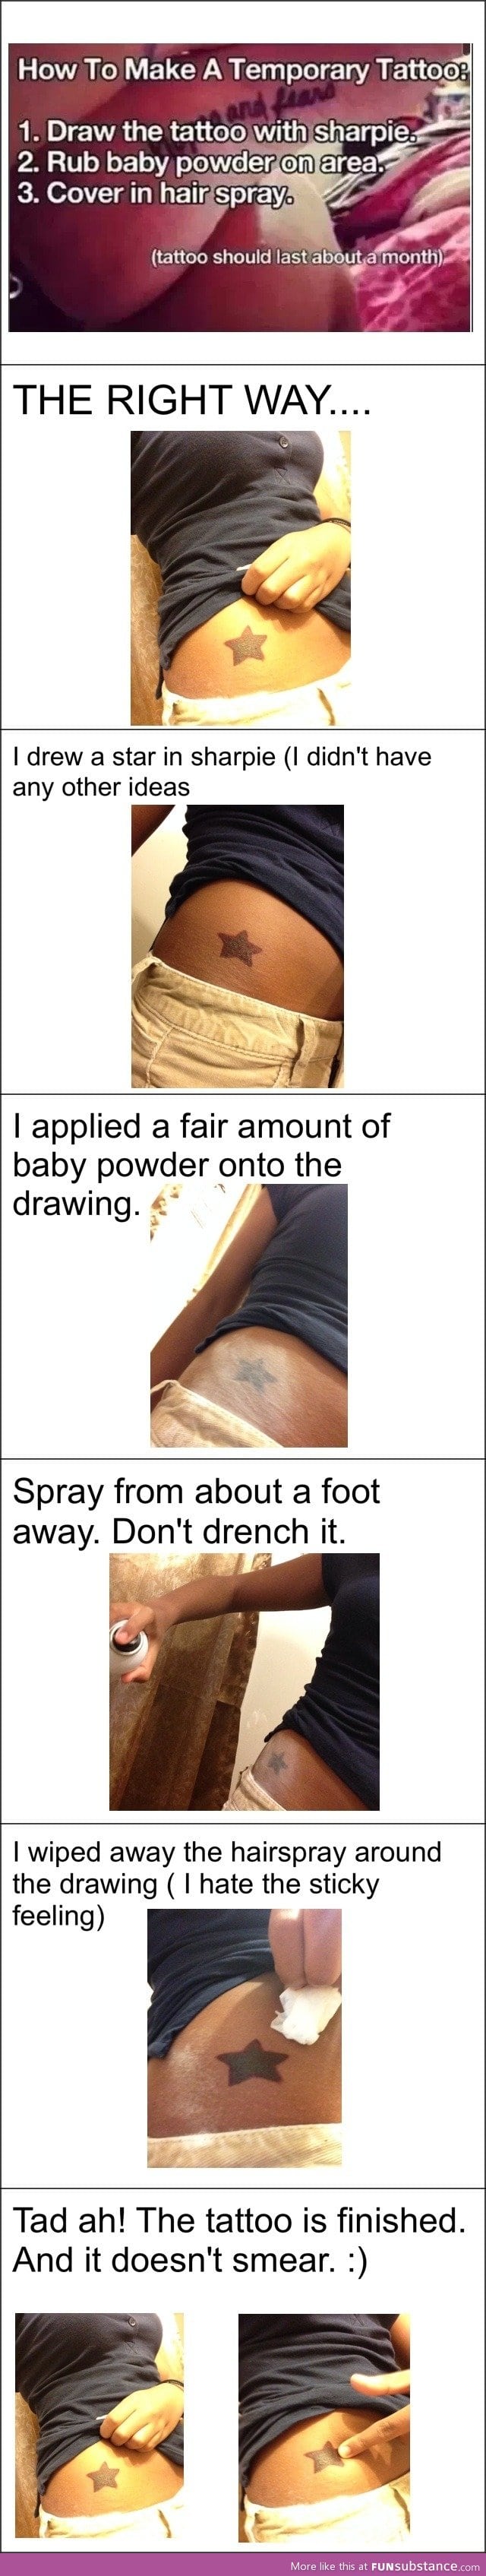 Make a sharpie tattoo that lasts a month